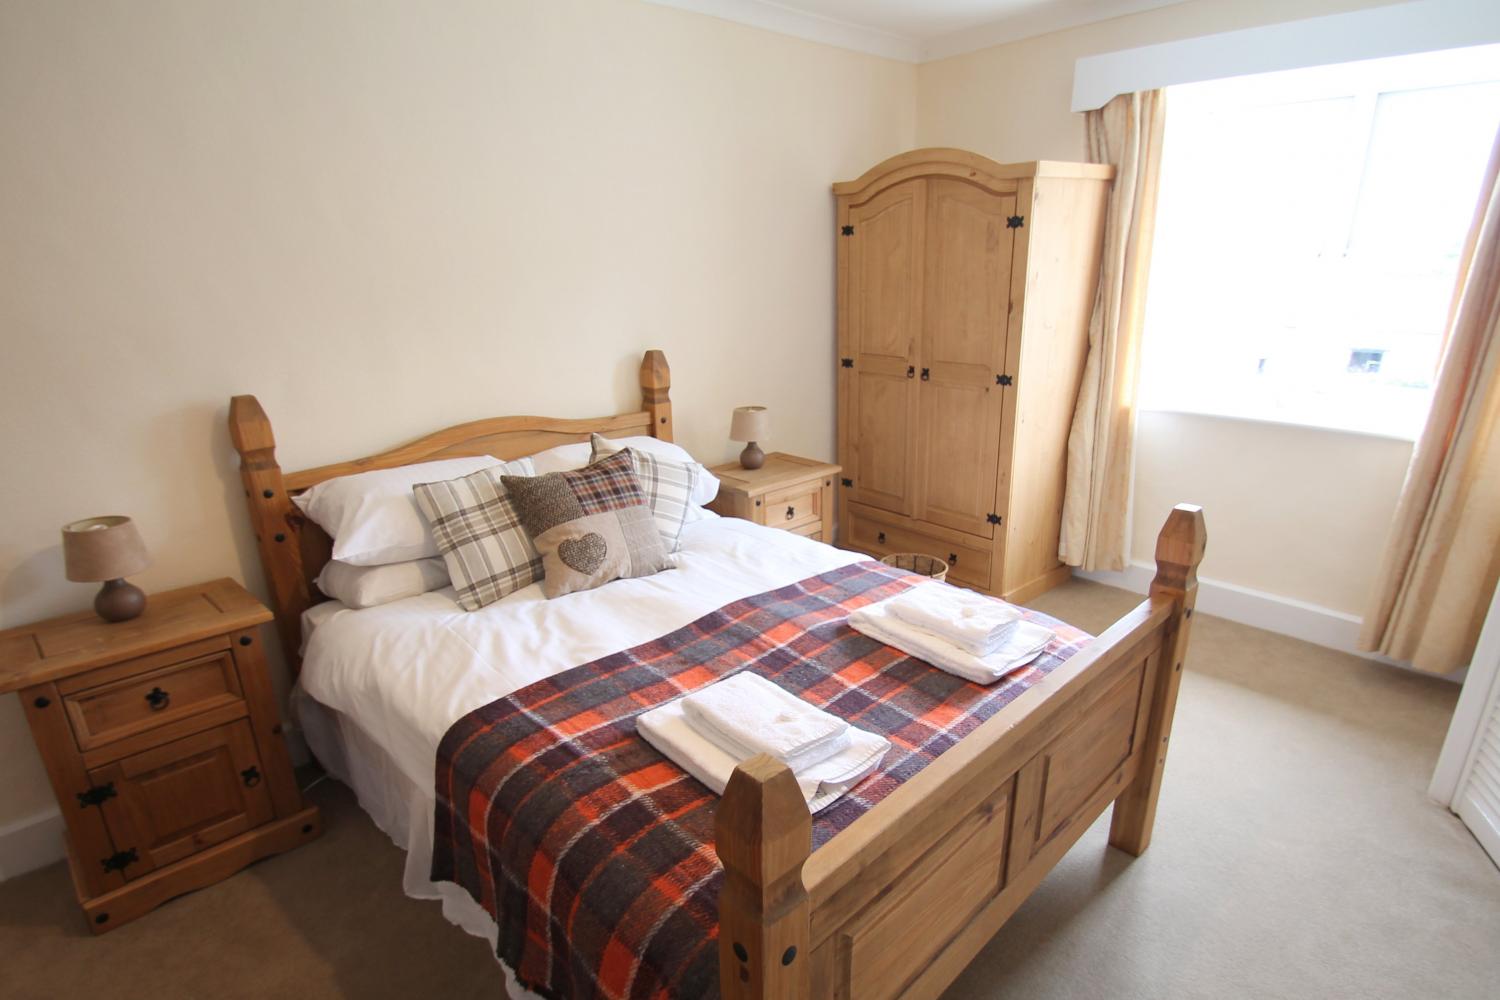 Master bedroom double bedded with ensuite shower and toilet rooms